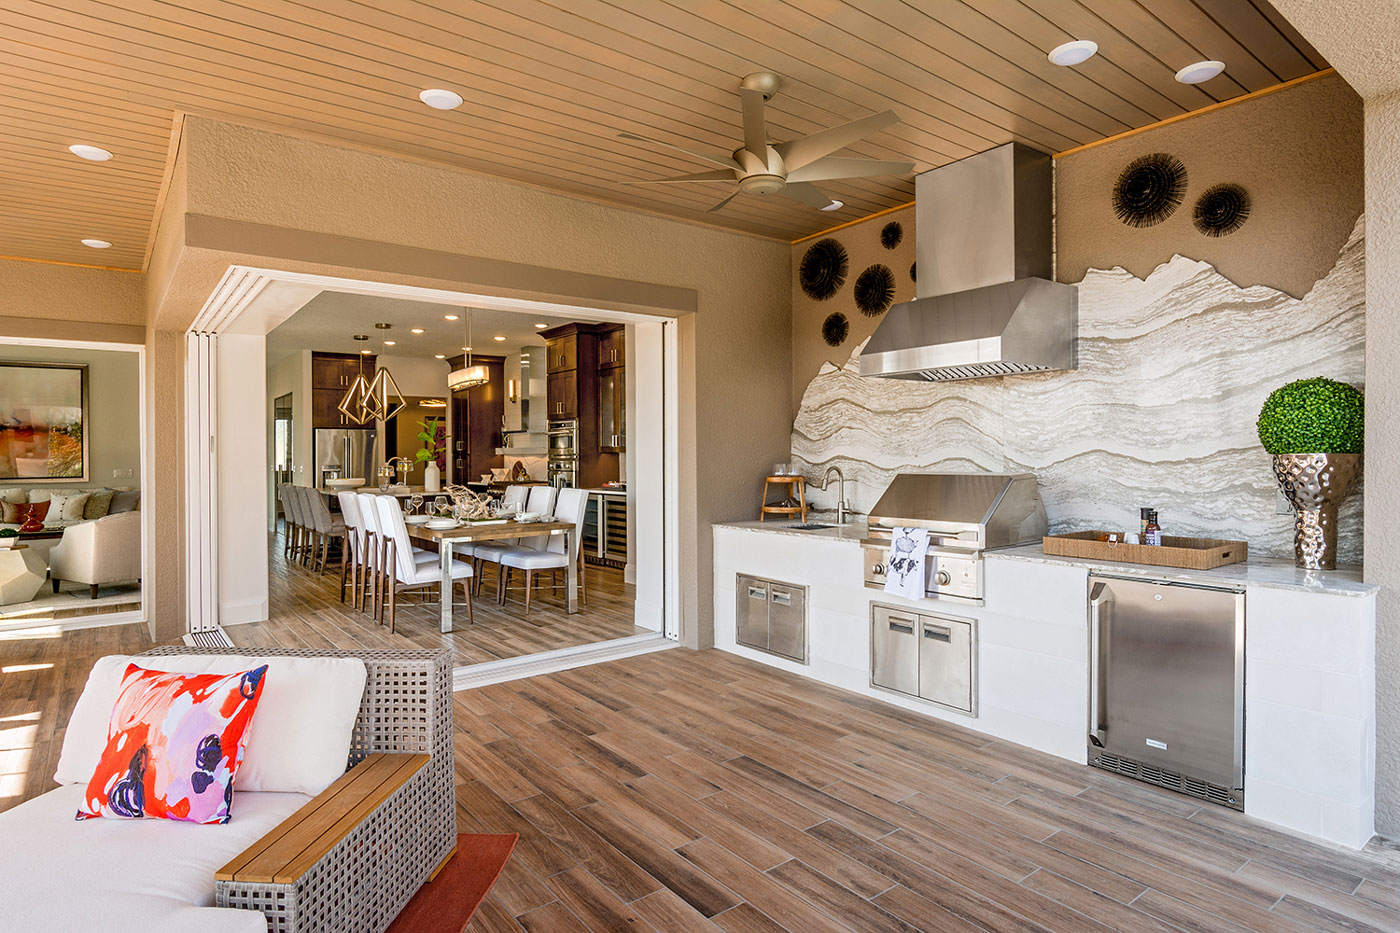 Outdoor kitchen with unique marble piece for backsplash, hardwood outdoor flooring, and lounge chairs in Florida.